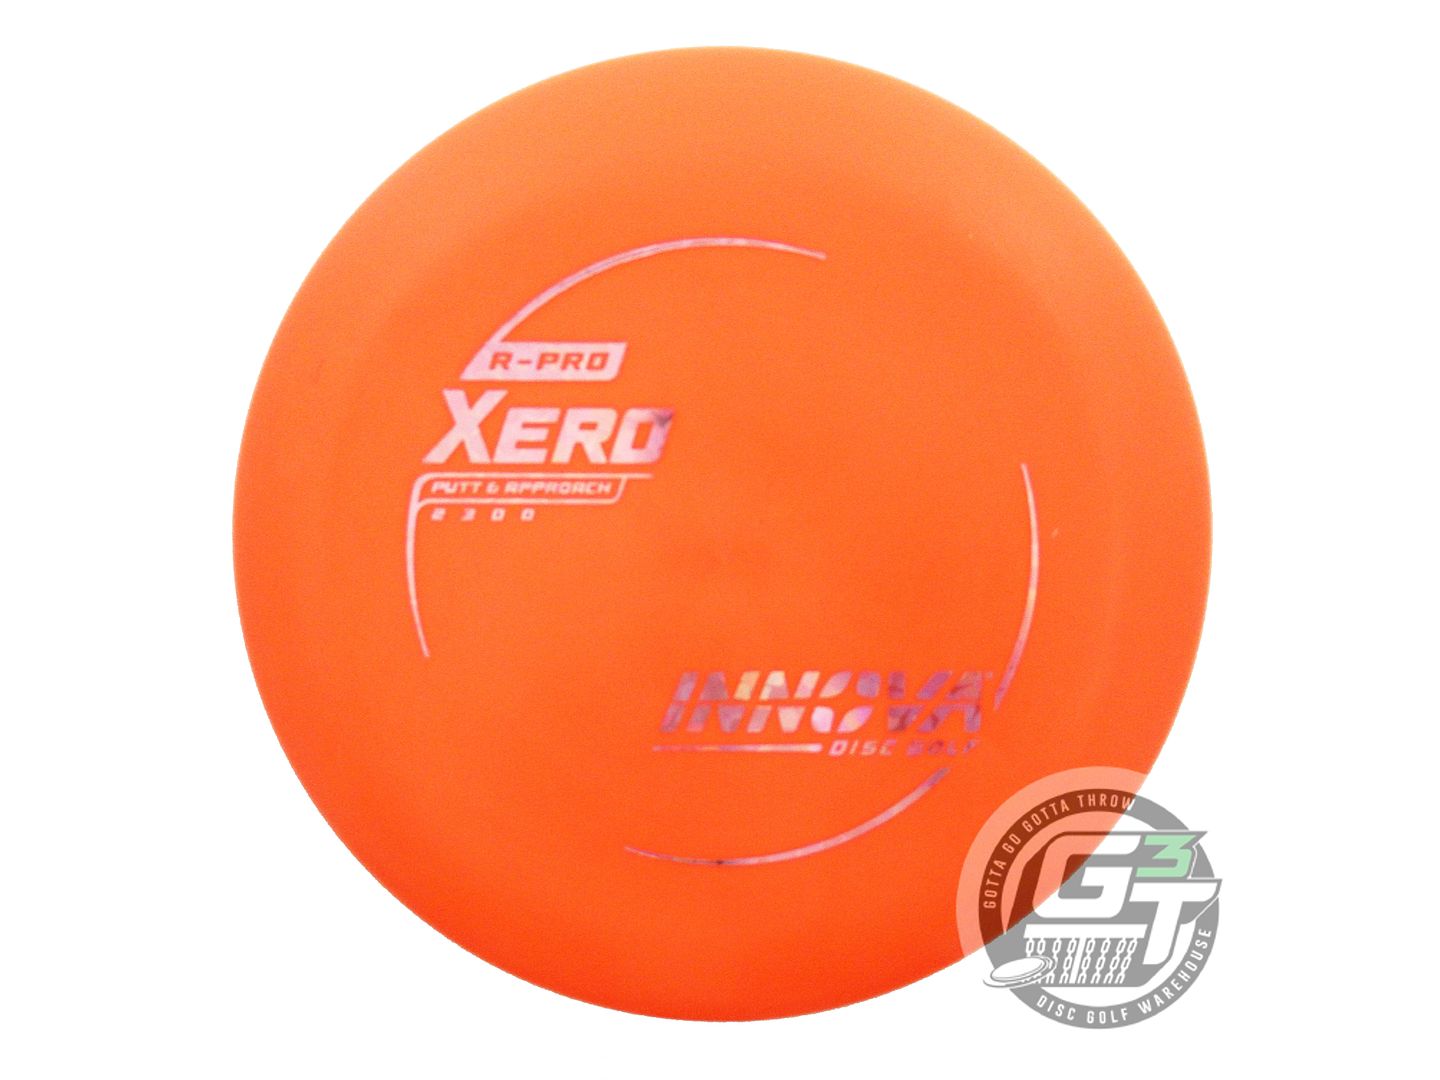 Innova R-Pro Xero Putter Golf Disc (Individually Listed)